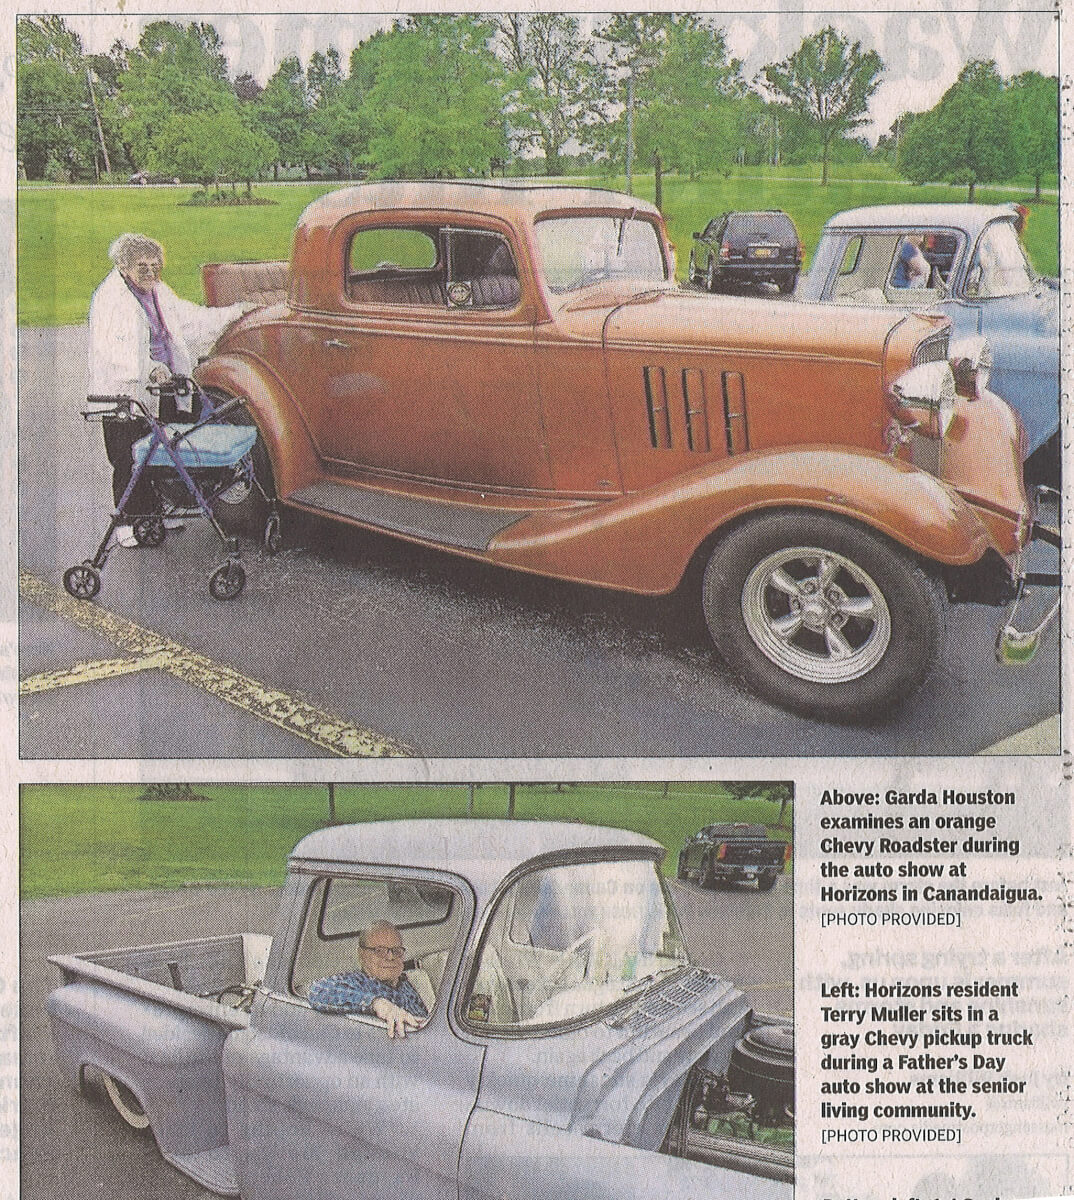 Horizons Classic Cars, 7.6.19 Daily Messenger (cropped)